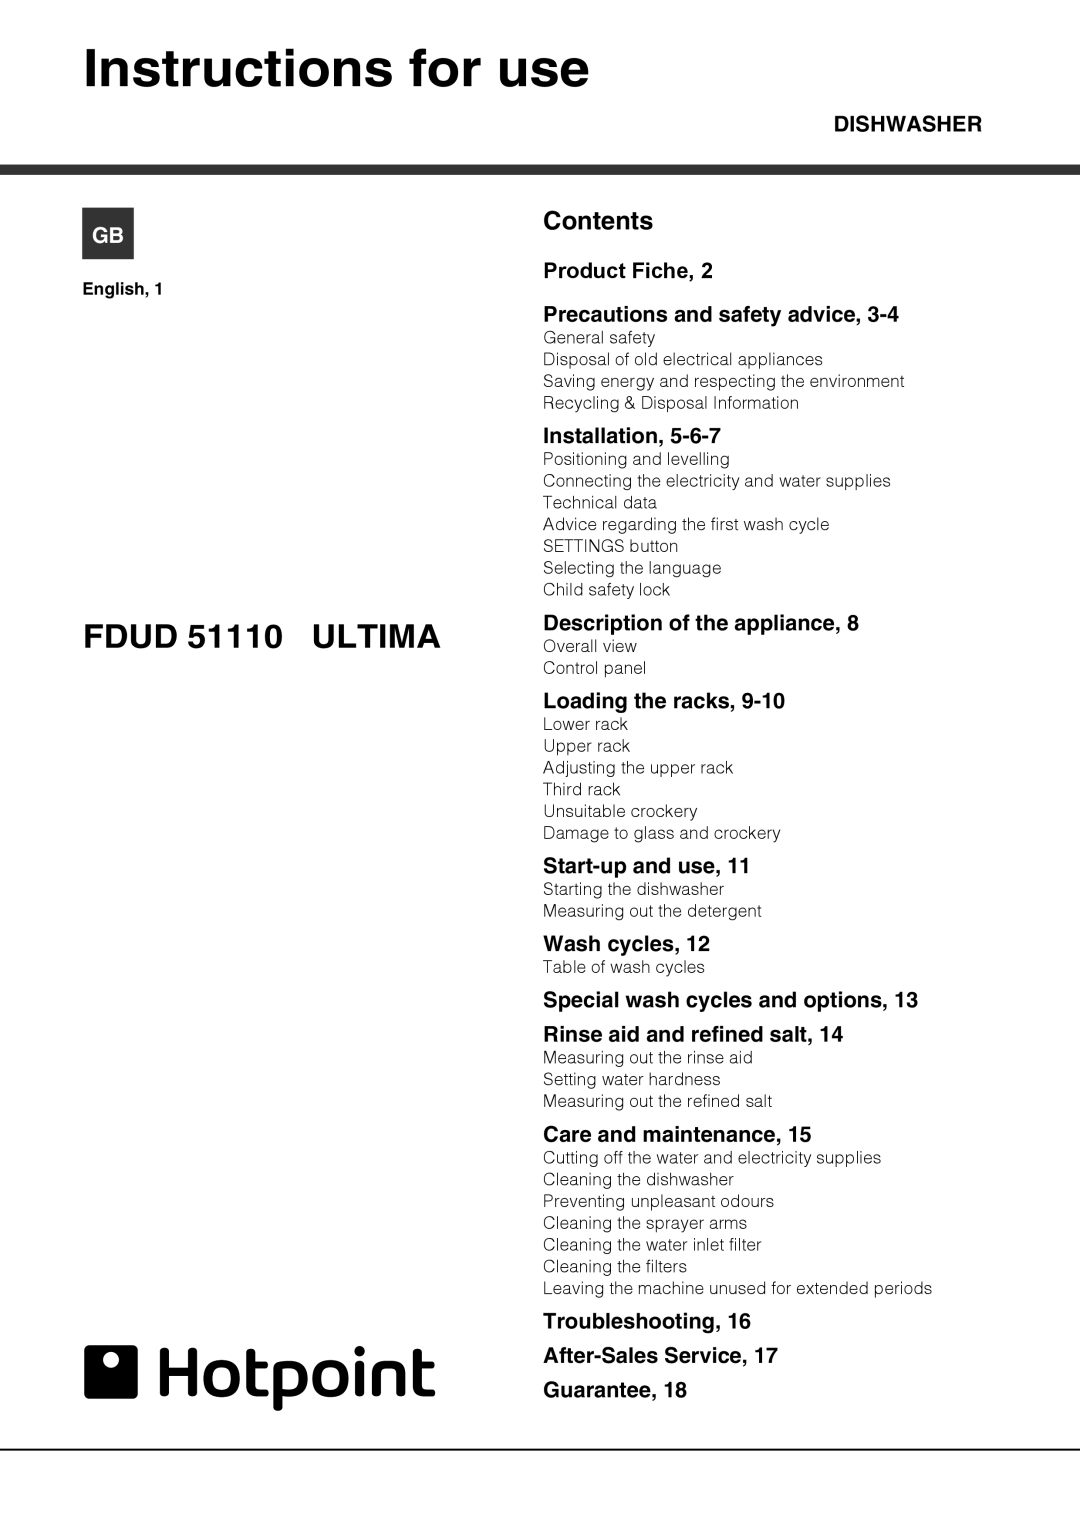 Hotpoint manual Instructions for use, FDUD 51110 ULTIMA, Contents, Product Fiche 